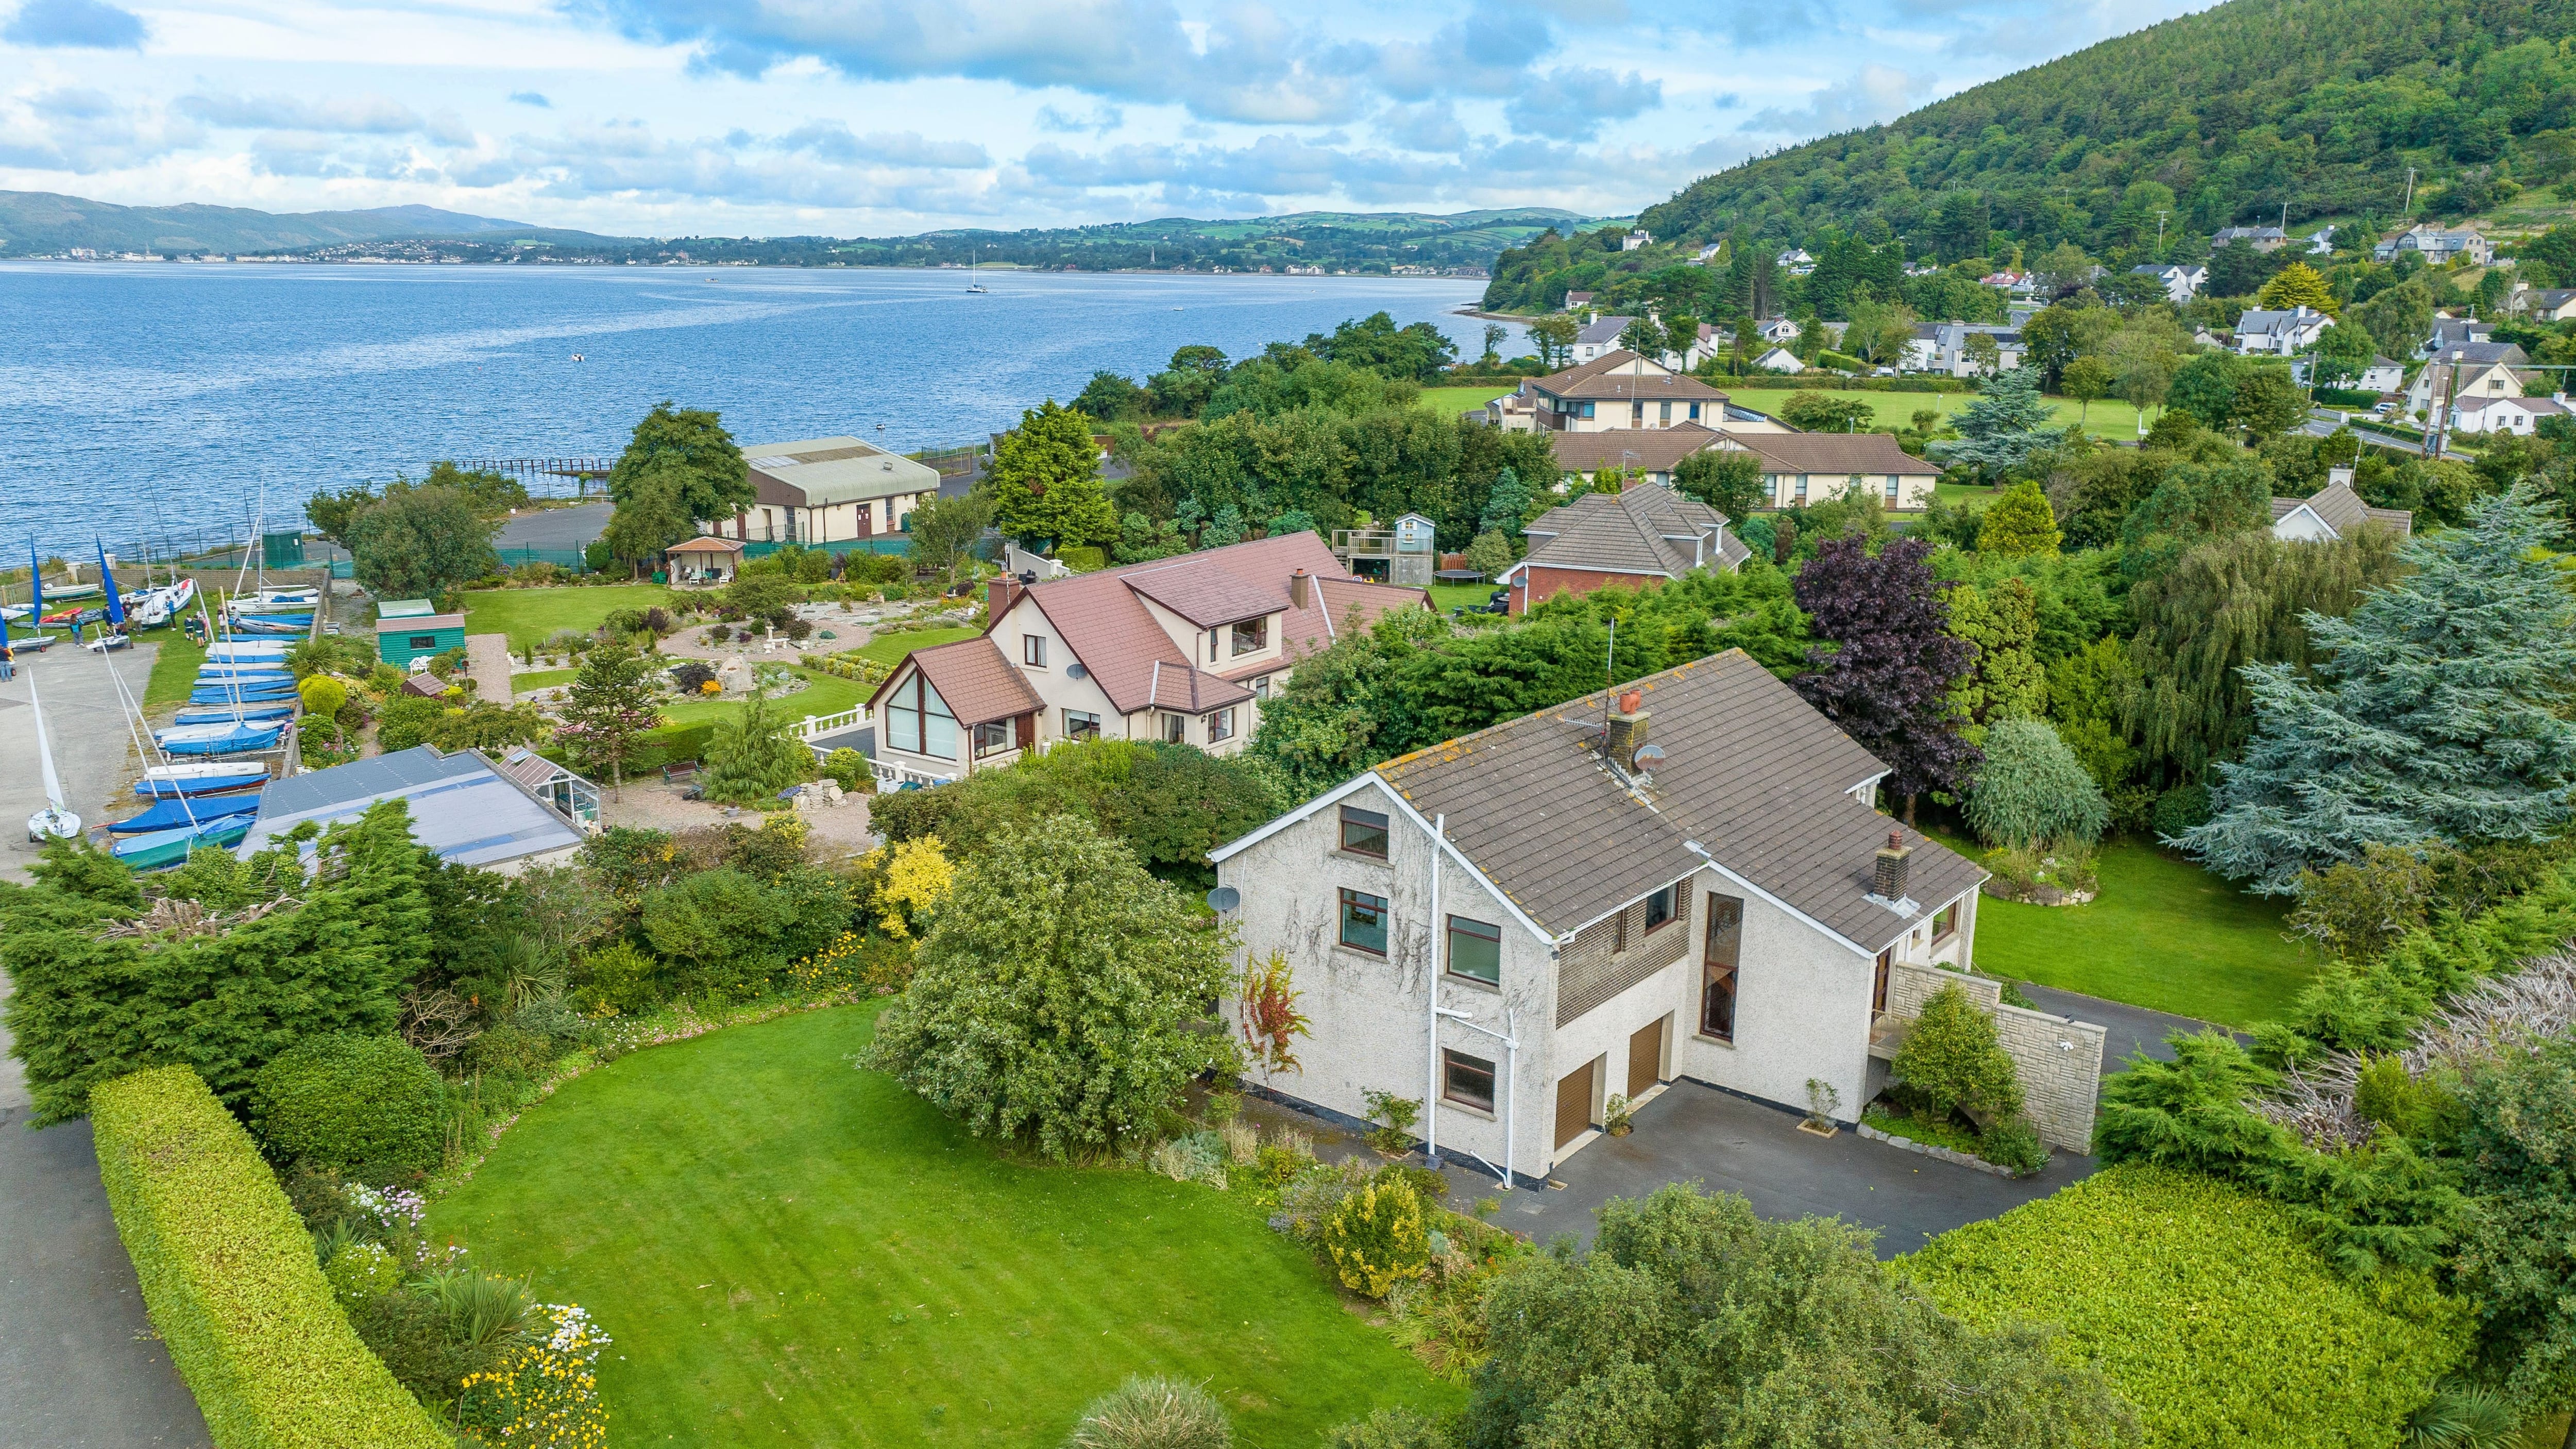 The scenic setting of Rostrevor. For sale is 33 Killowen Village, BT34 – offered at bids over £495,950 and for sale by Best Property Services.
The well located five-bed detached residence in a highly desirable area boasts panoramic 360-degree views, with the majestic Mourne Mountains as a stunning backdrop